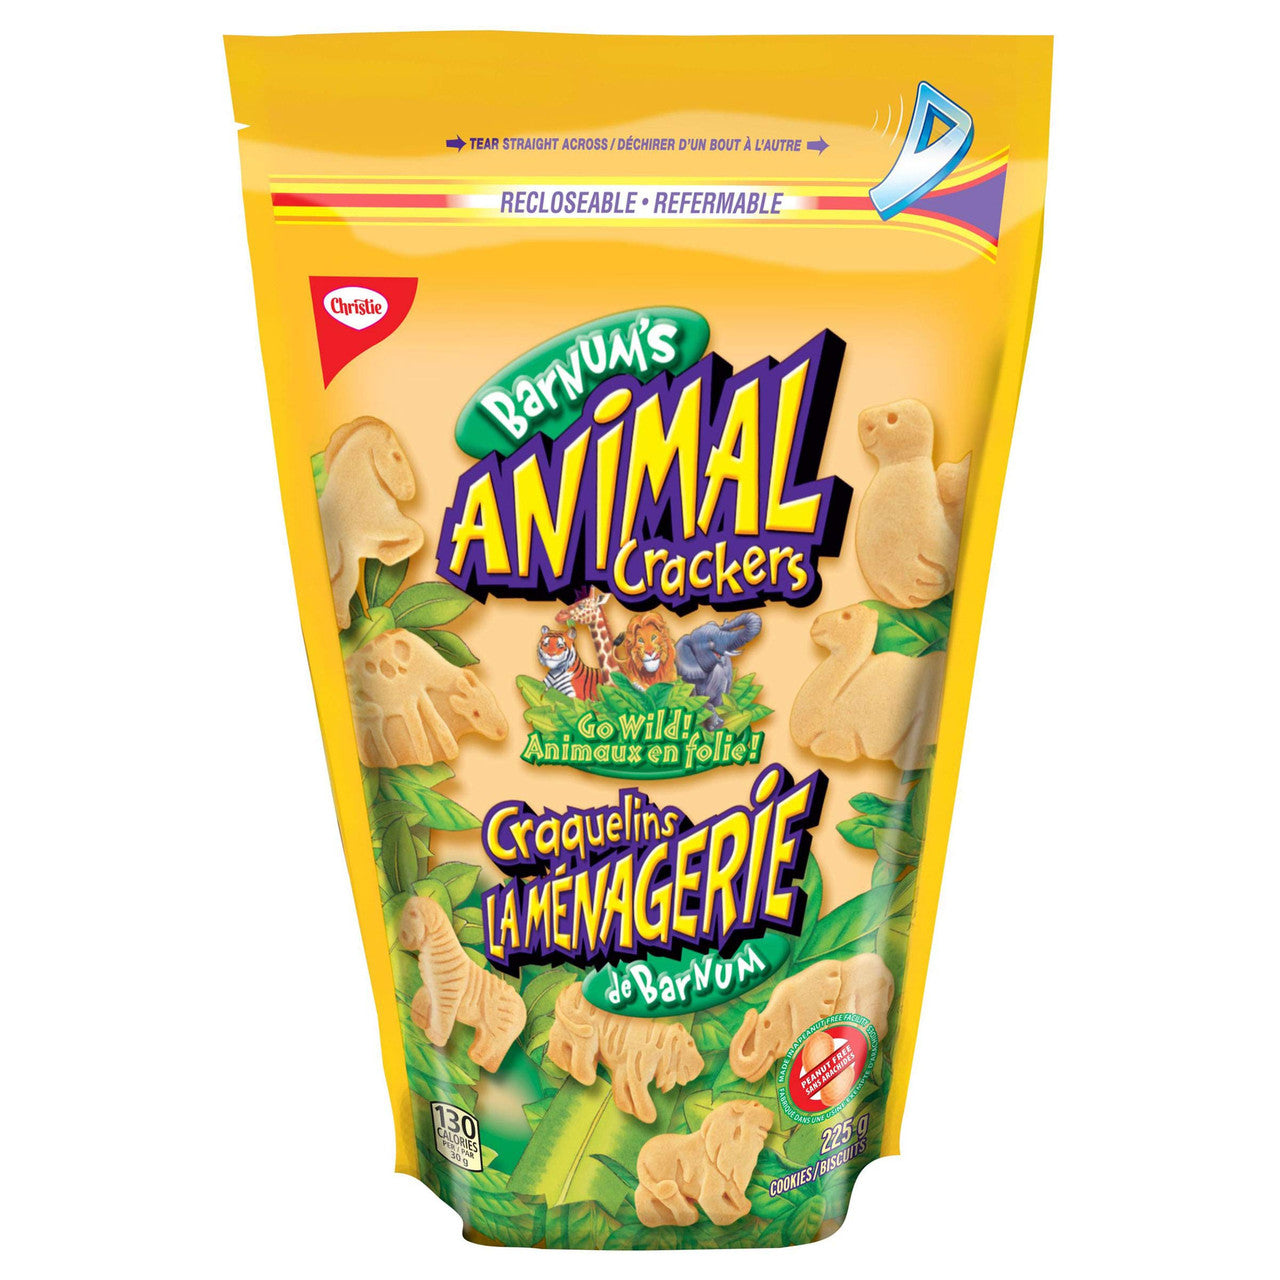 Christie Barnum Arrowroot Animal Crackers, 225g/7.9oz, (Imported from Canada)